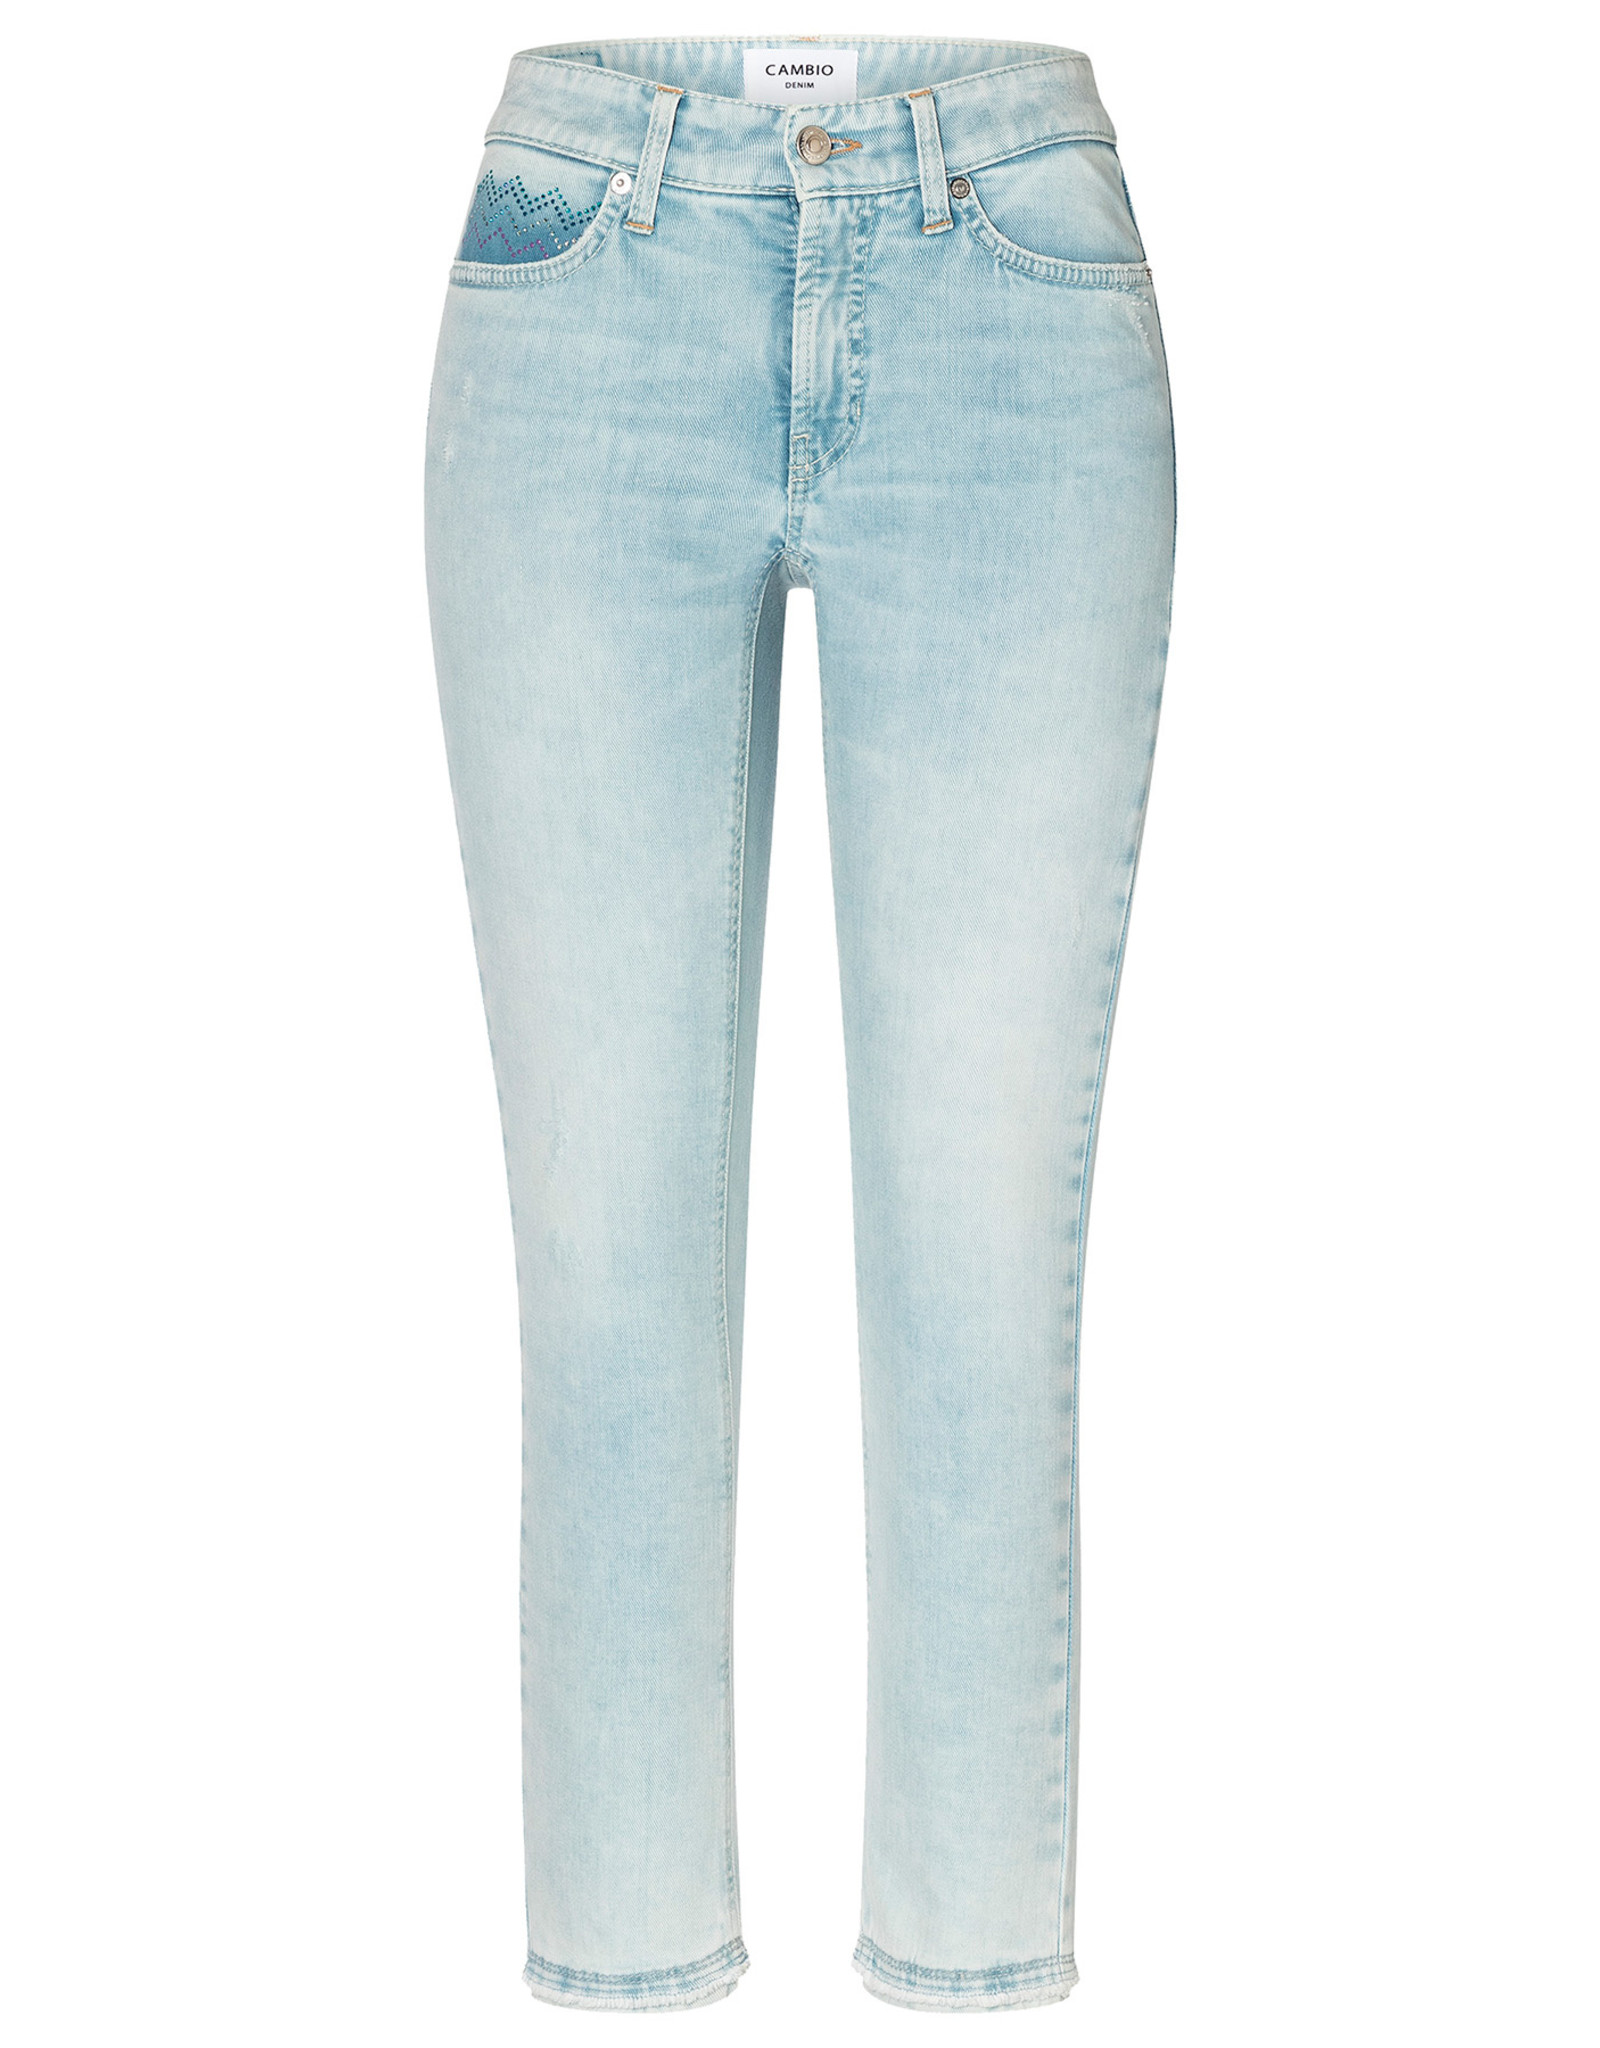 Cambio Paris Cropped Light Summer Jeans